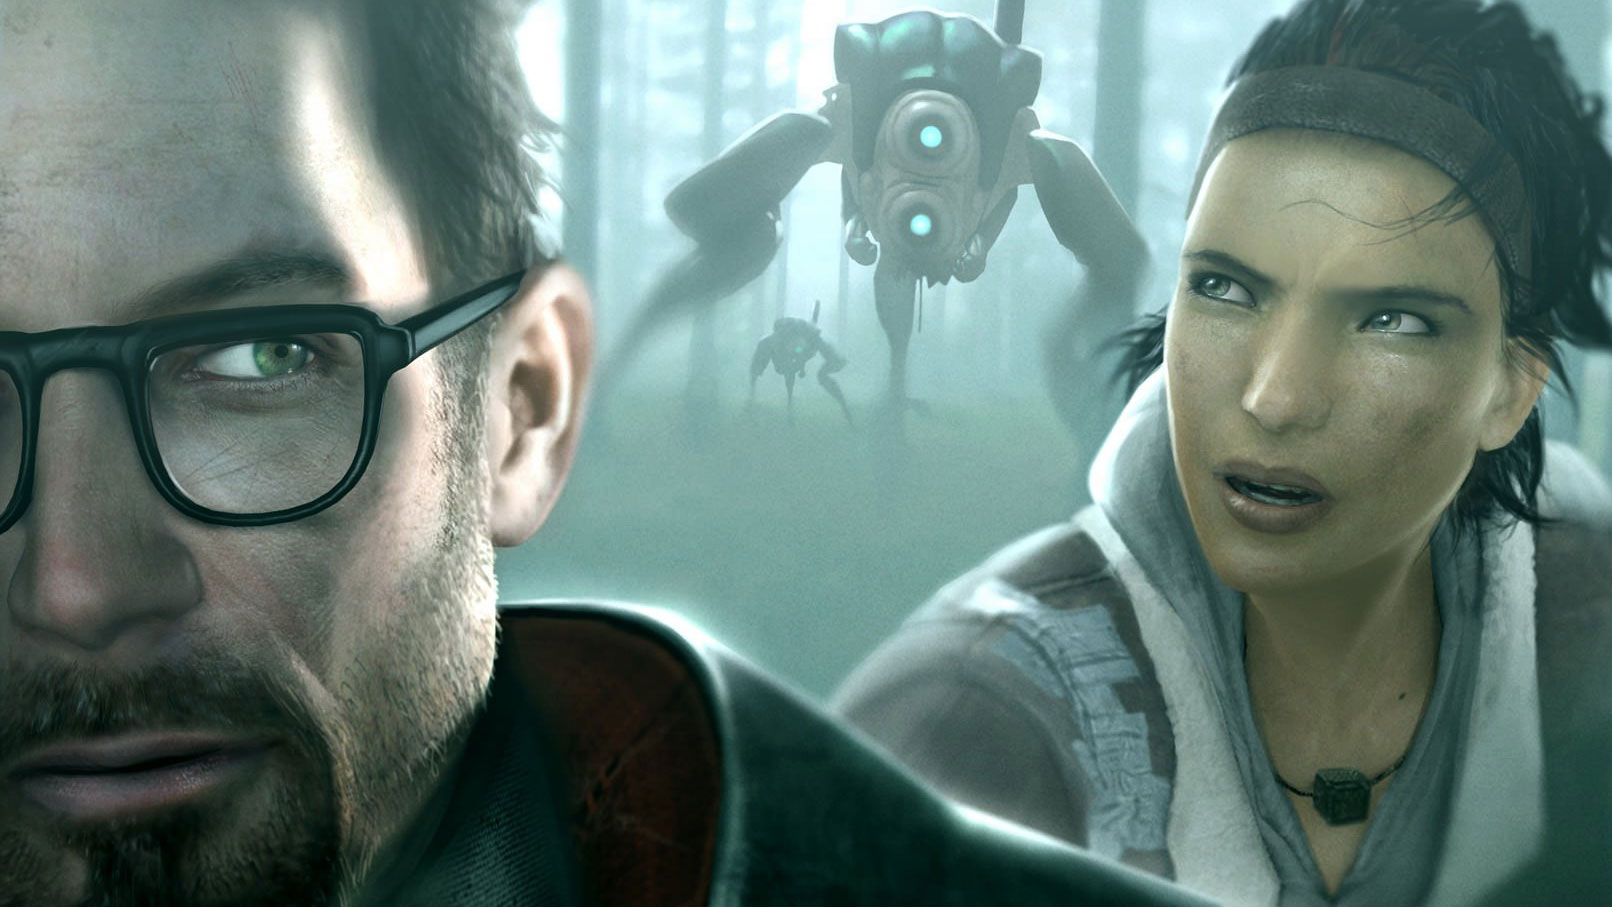 The Half-Life games are free on Steam for the next two months